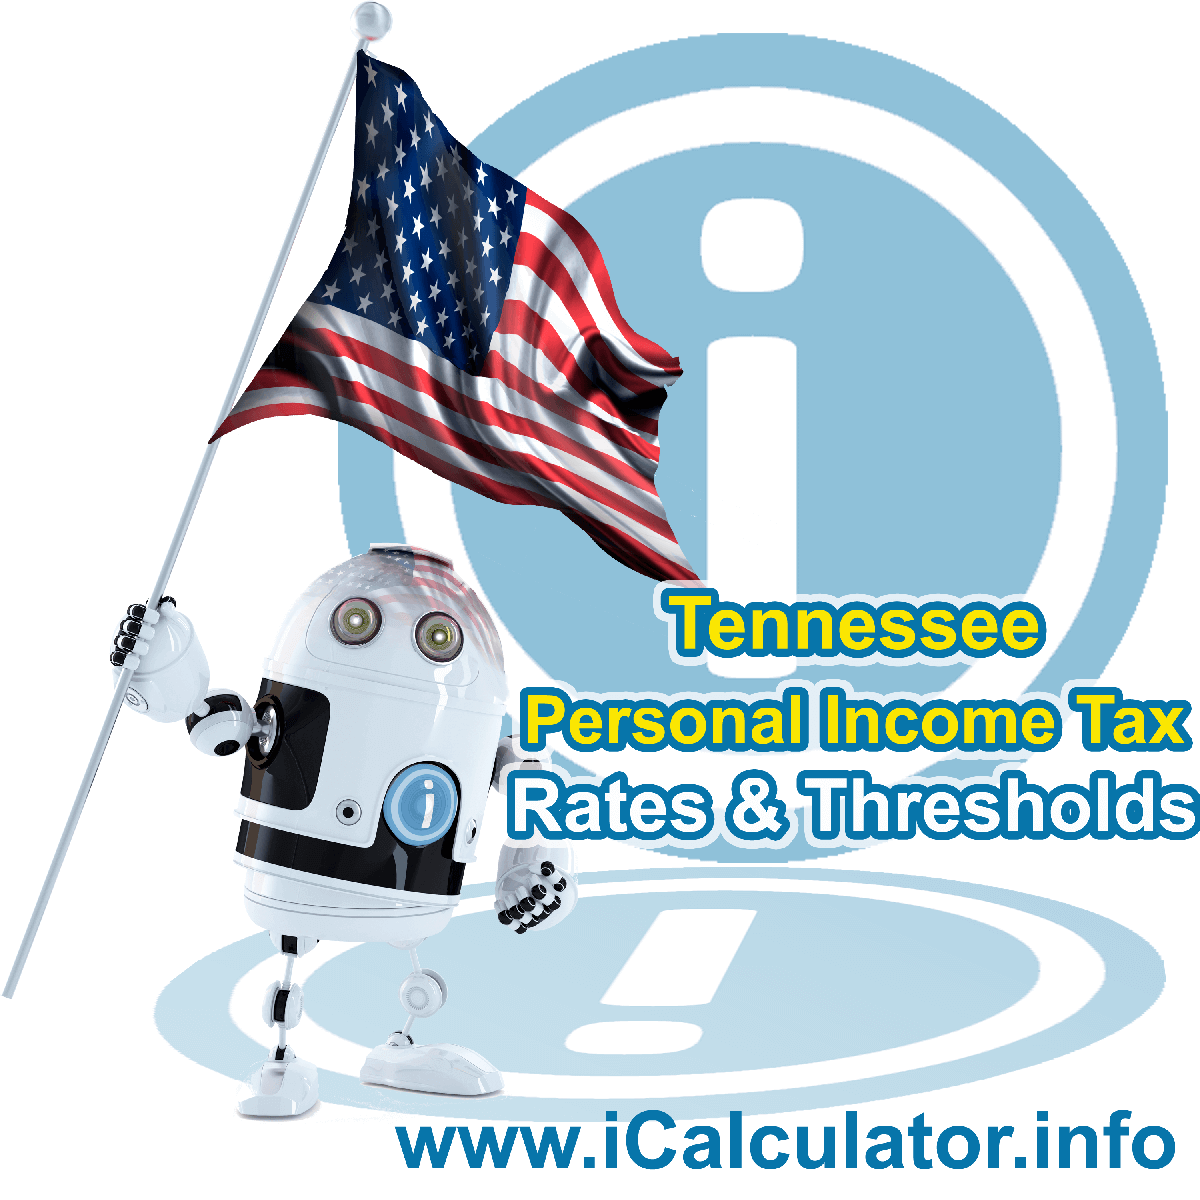 Tennessee State Tax Tables 2020. This image displays details of the Tennessee State Tax Tables for the 2020 tax return year which is provided in support of the 2020 US Tax Calculator